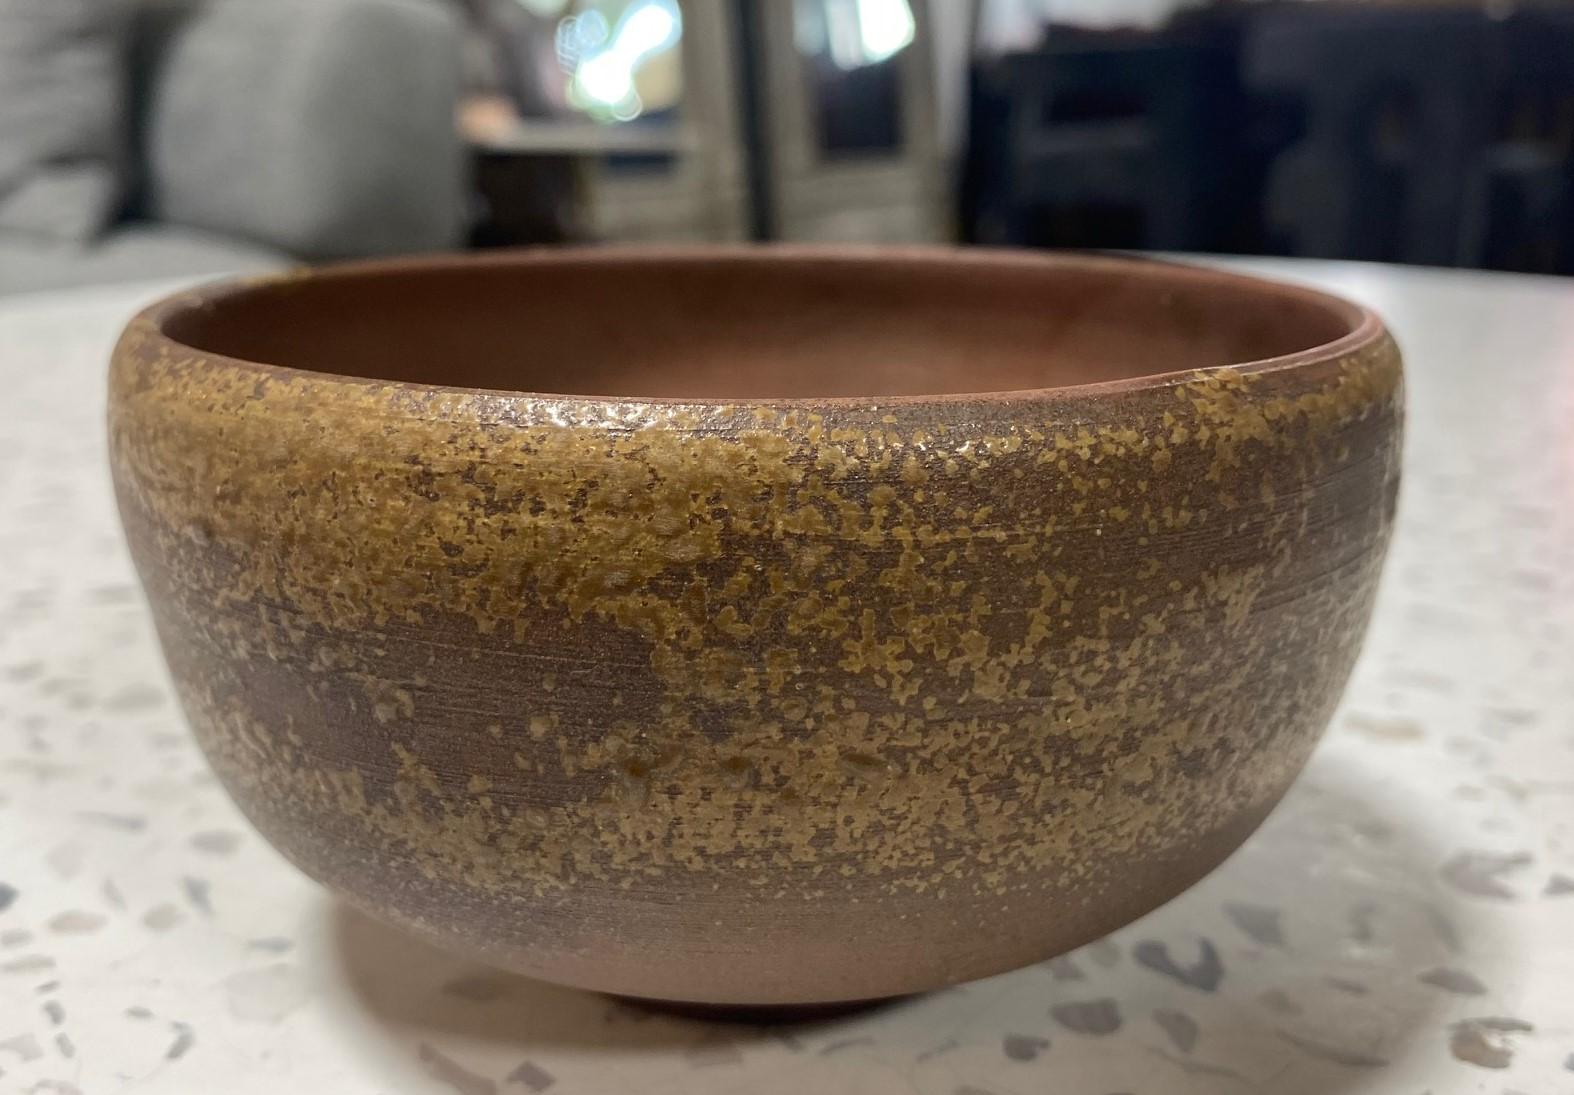 Kaneshige Toyo National Treasure Signed Japanese Bizen Pottery Chawan Tea Bowl In Good Condition For Sale In Studio City, CA